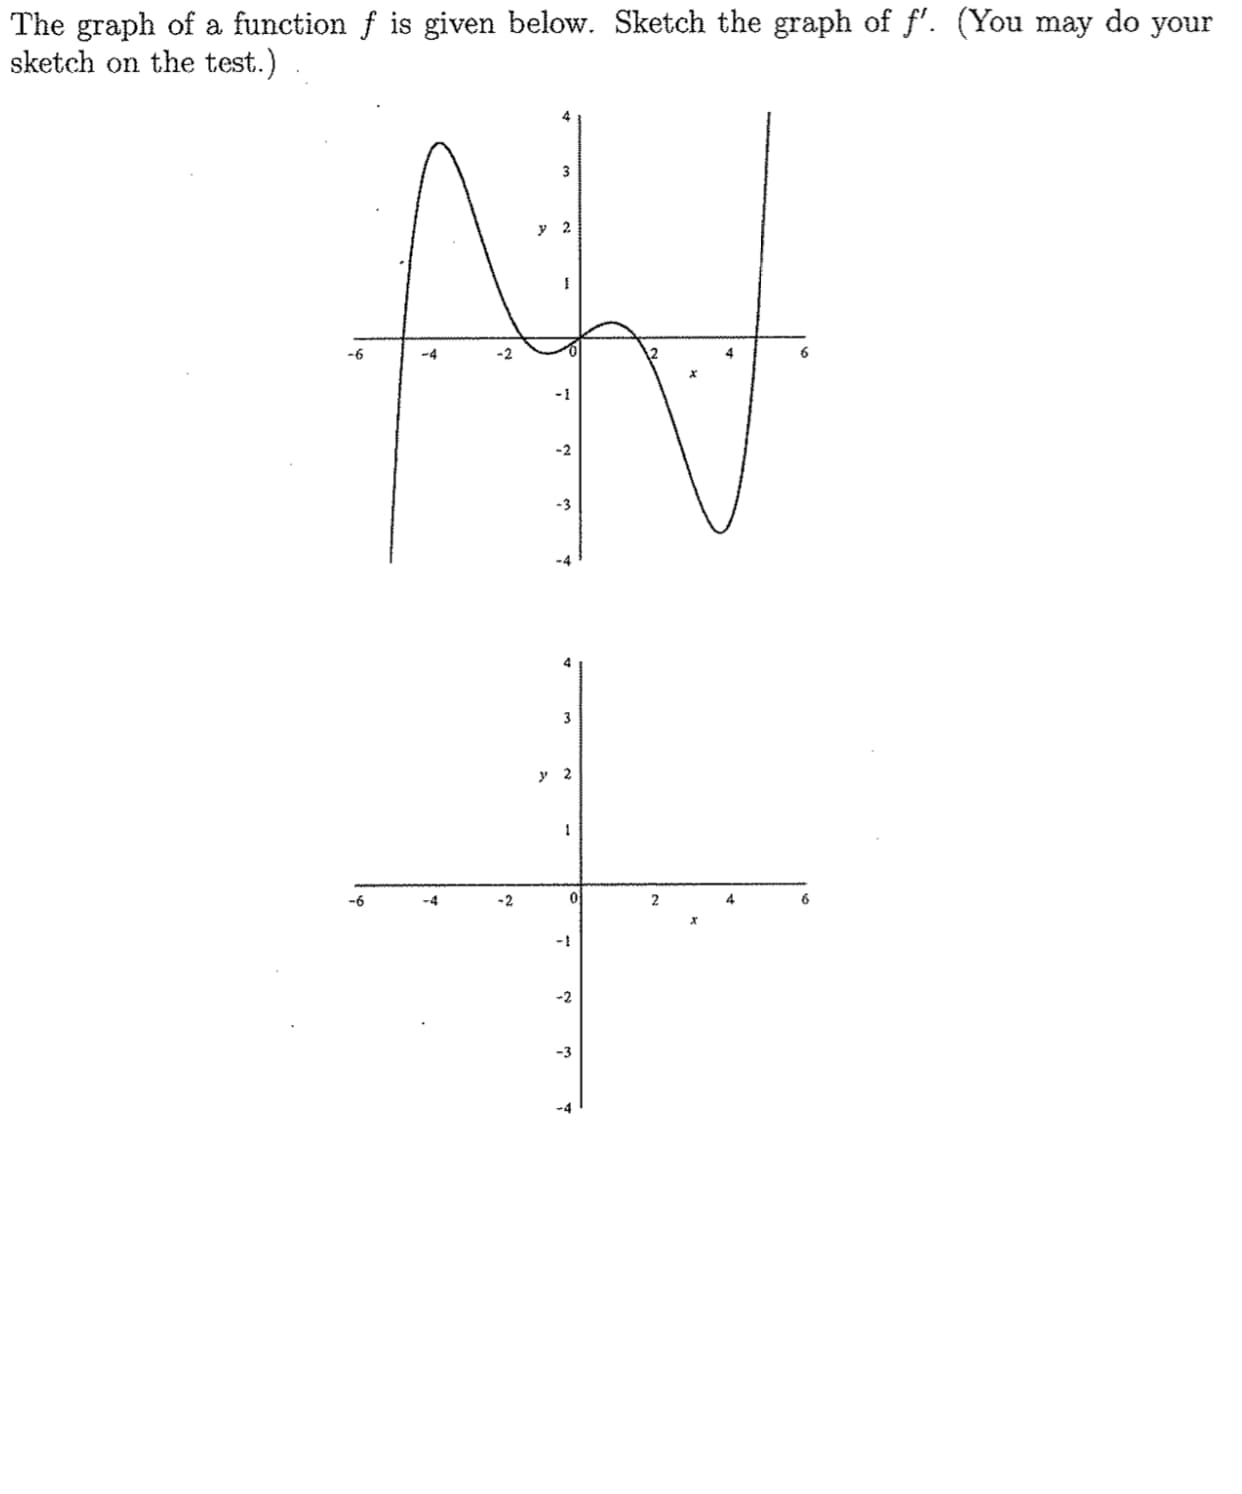 The graph of a function f is given below. Sketch the graph of f'. (You may do your
sketch on the test.)
-6
-4
-2
-2
-3
-6
-4
-2
-1
-2
-3
